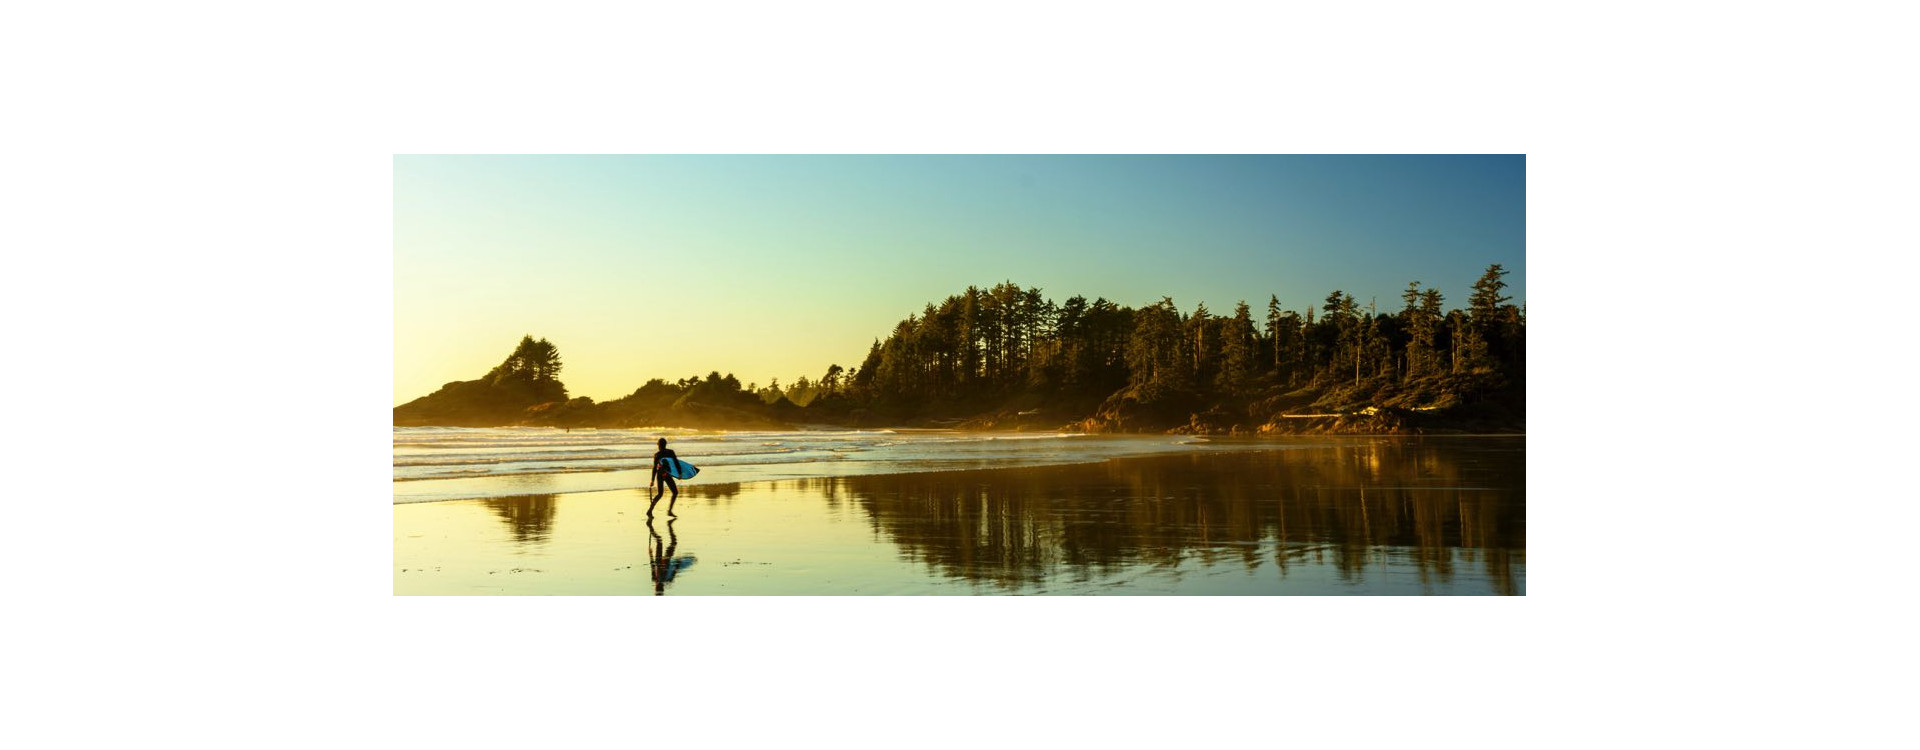 The best beaches in Canada